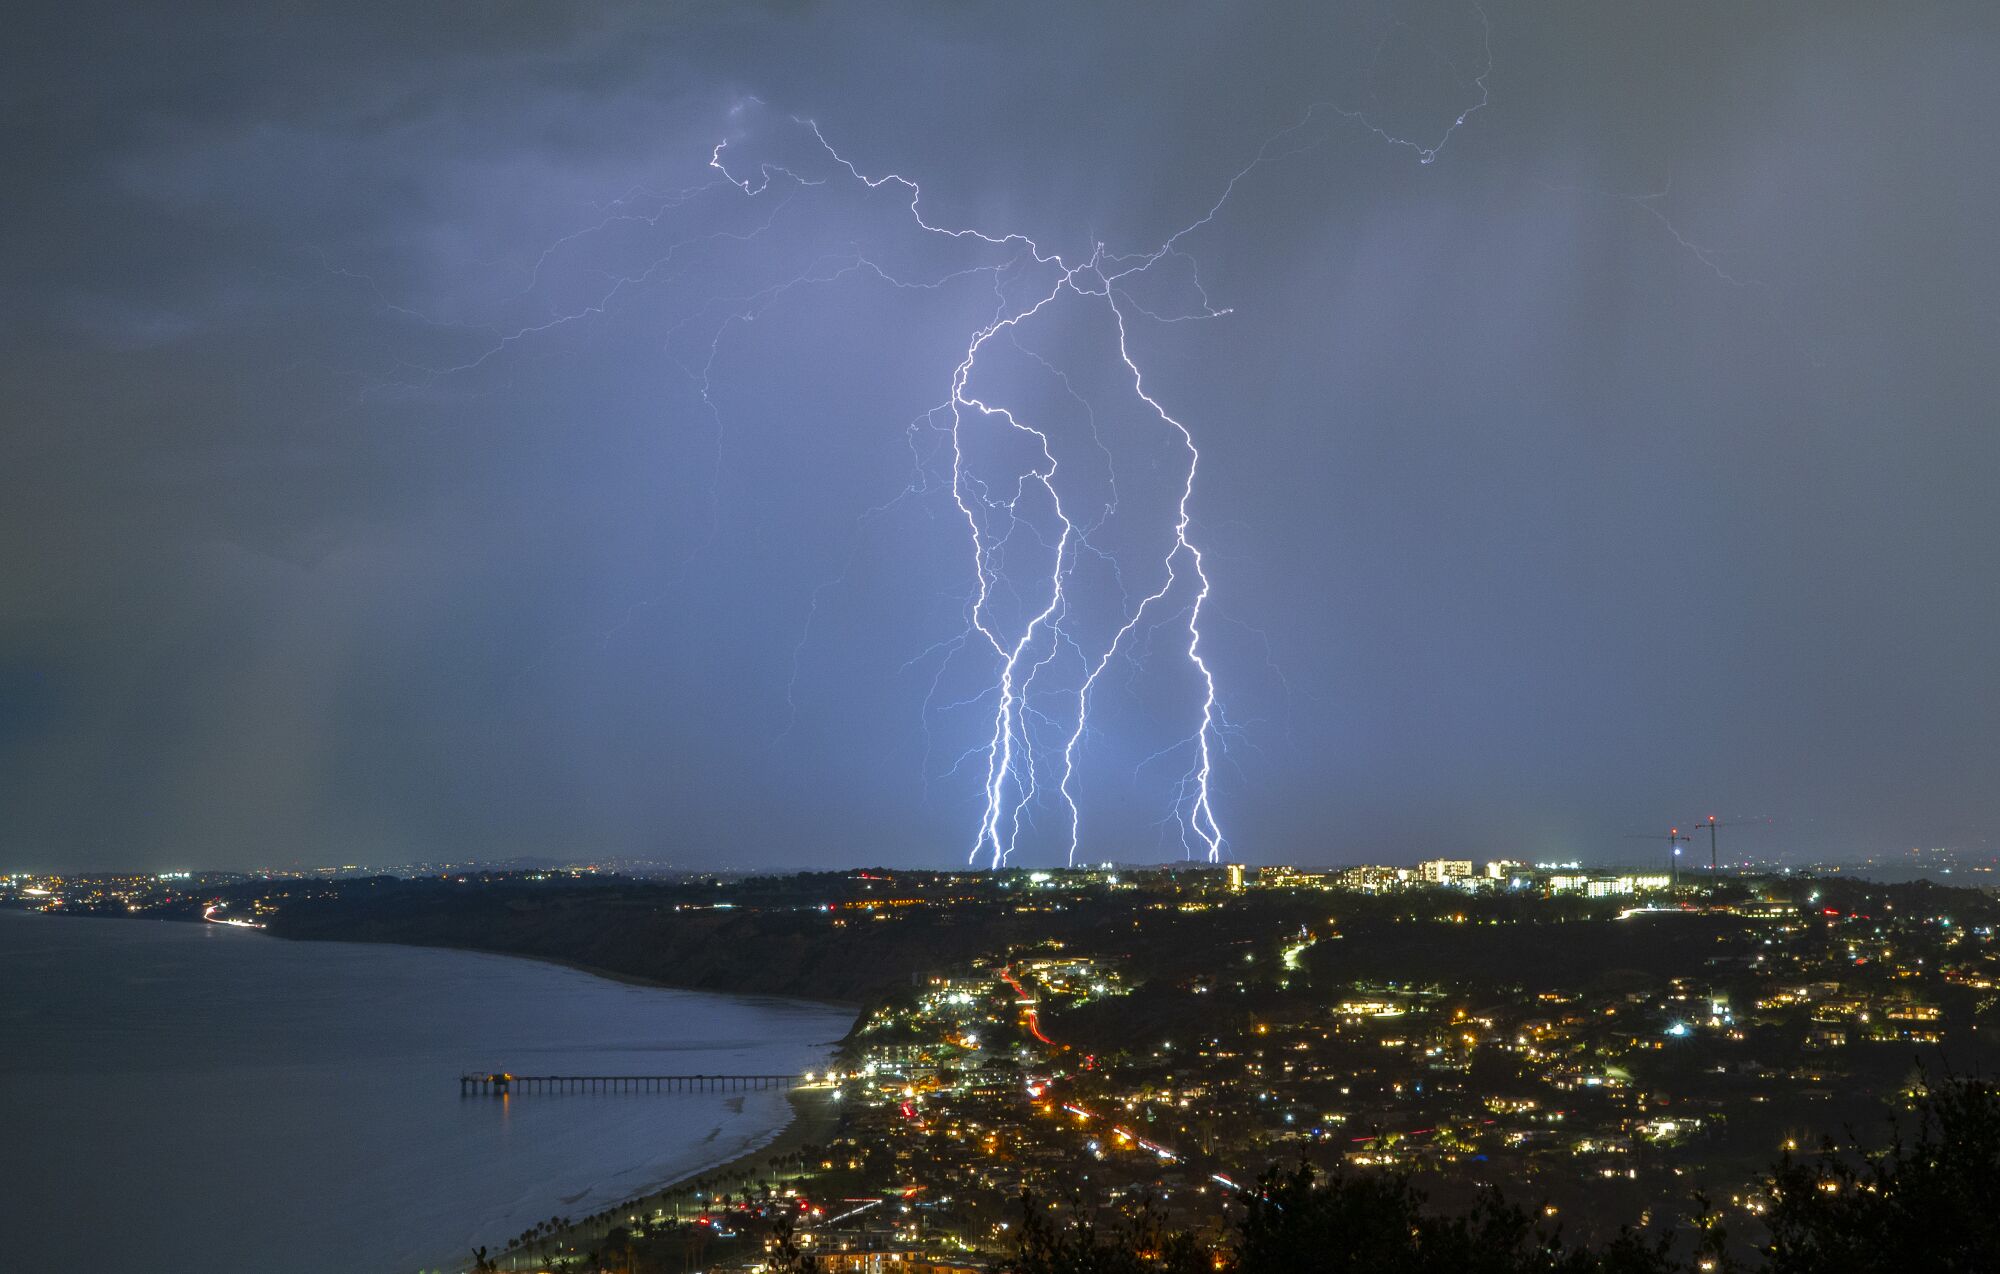 Lighting strikes the ground in north San Diego County with La Jolla in the foreground as seen from Mt. Soledad.